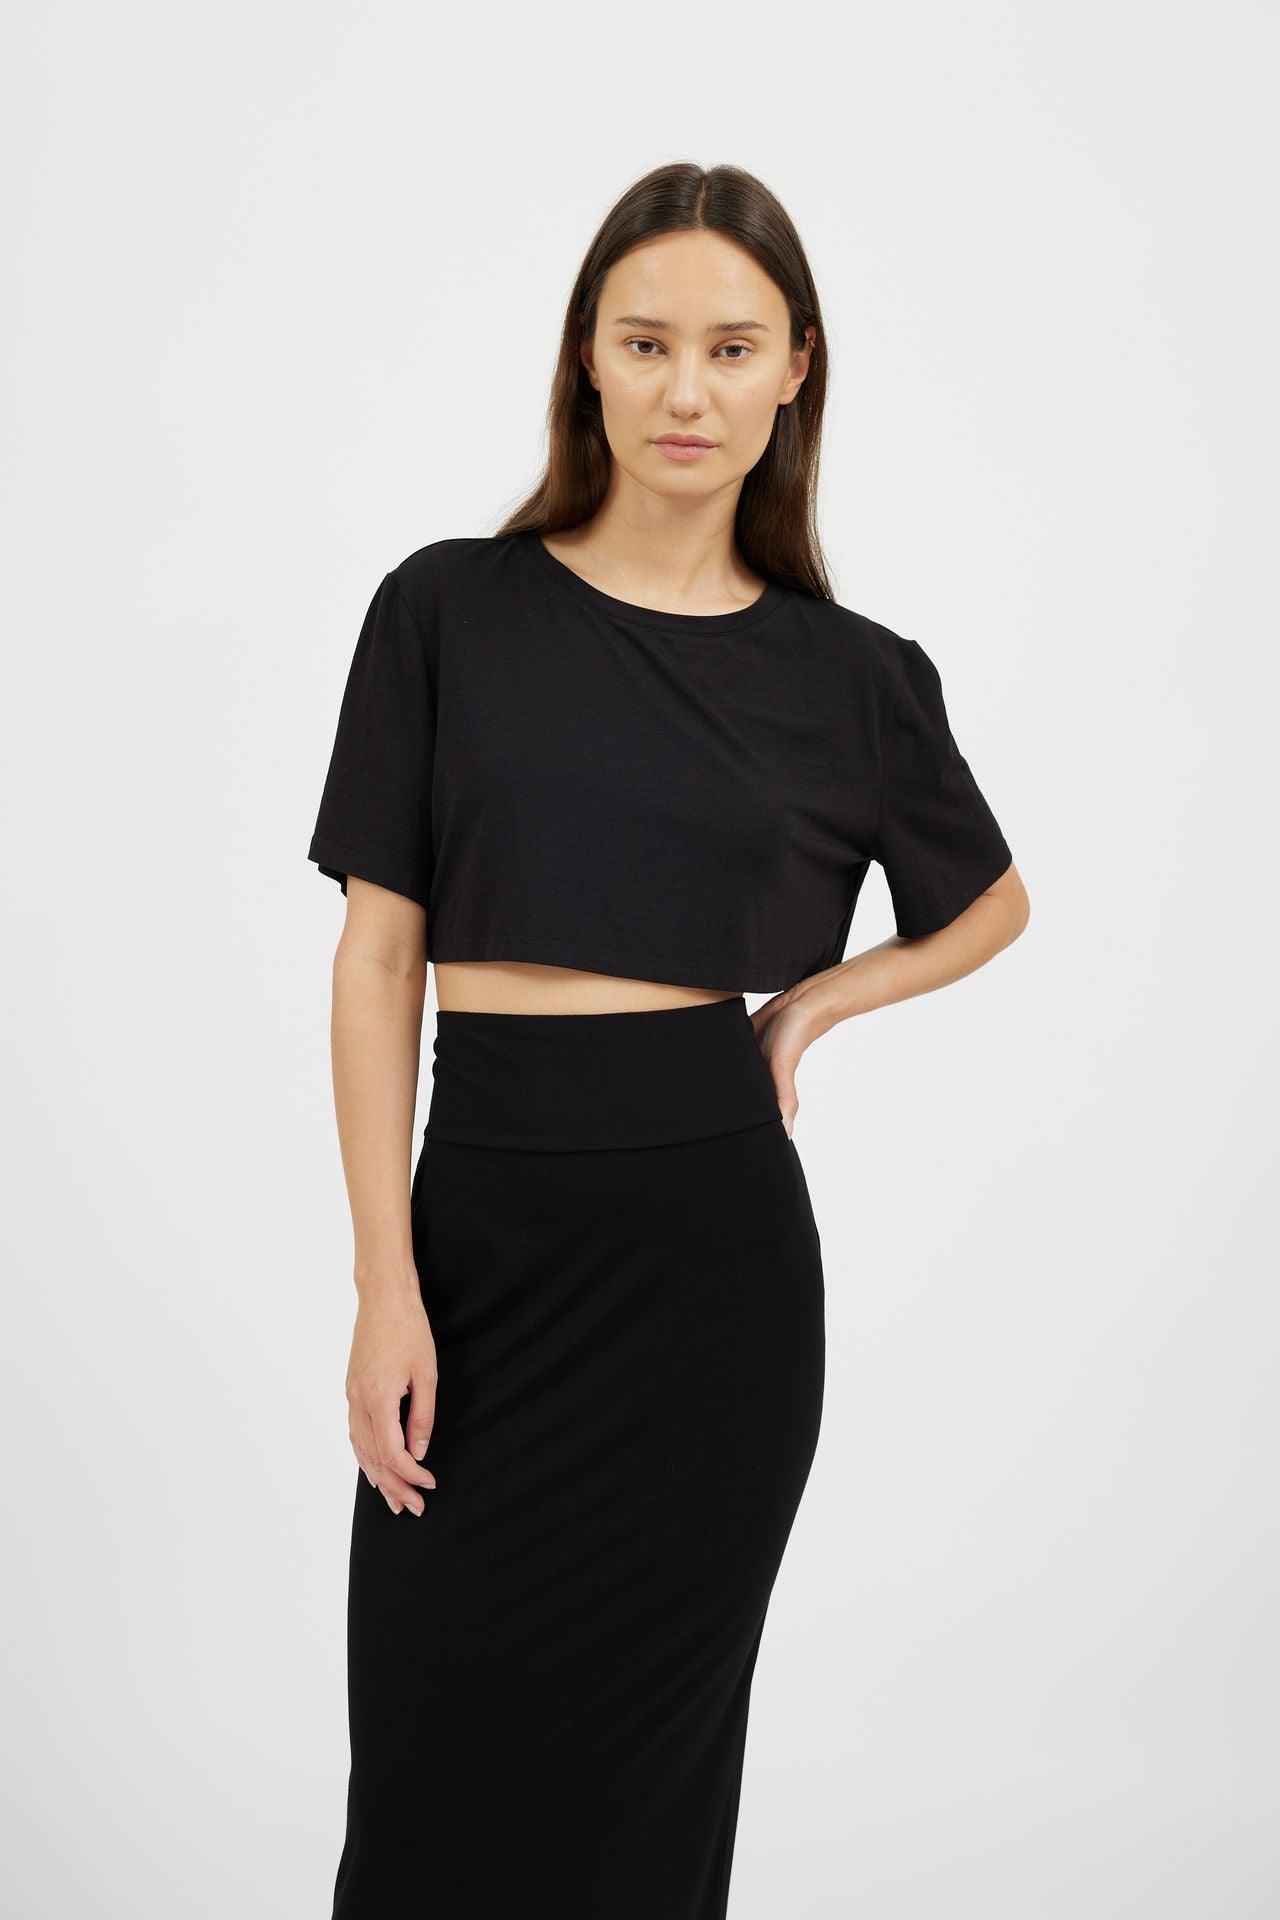 High Waisted Pencil Skirt - NOT LABELED